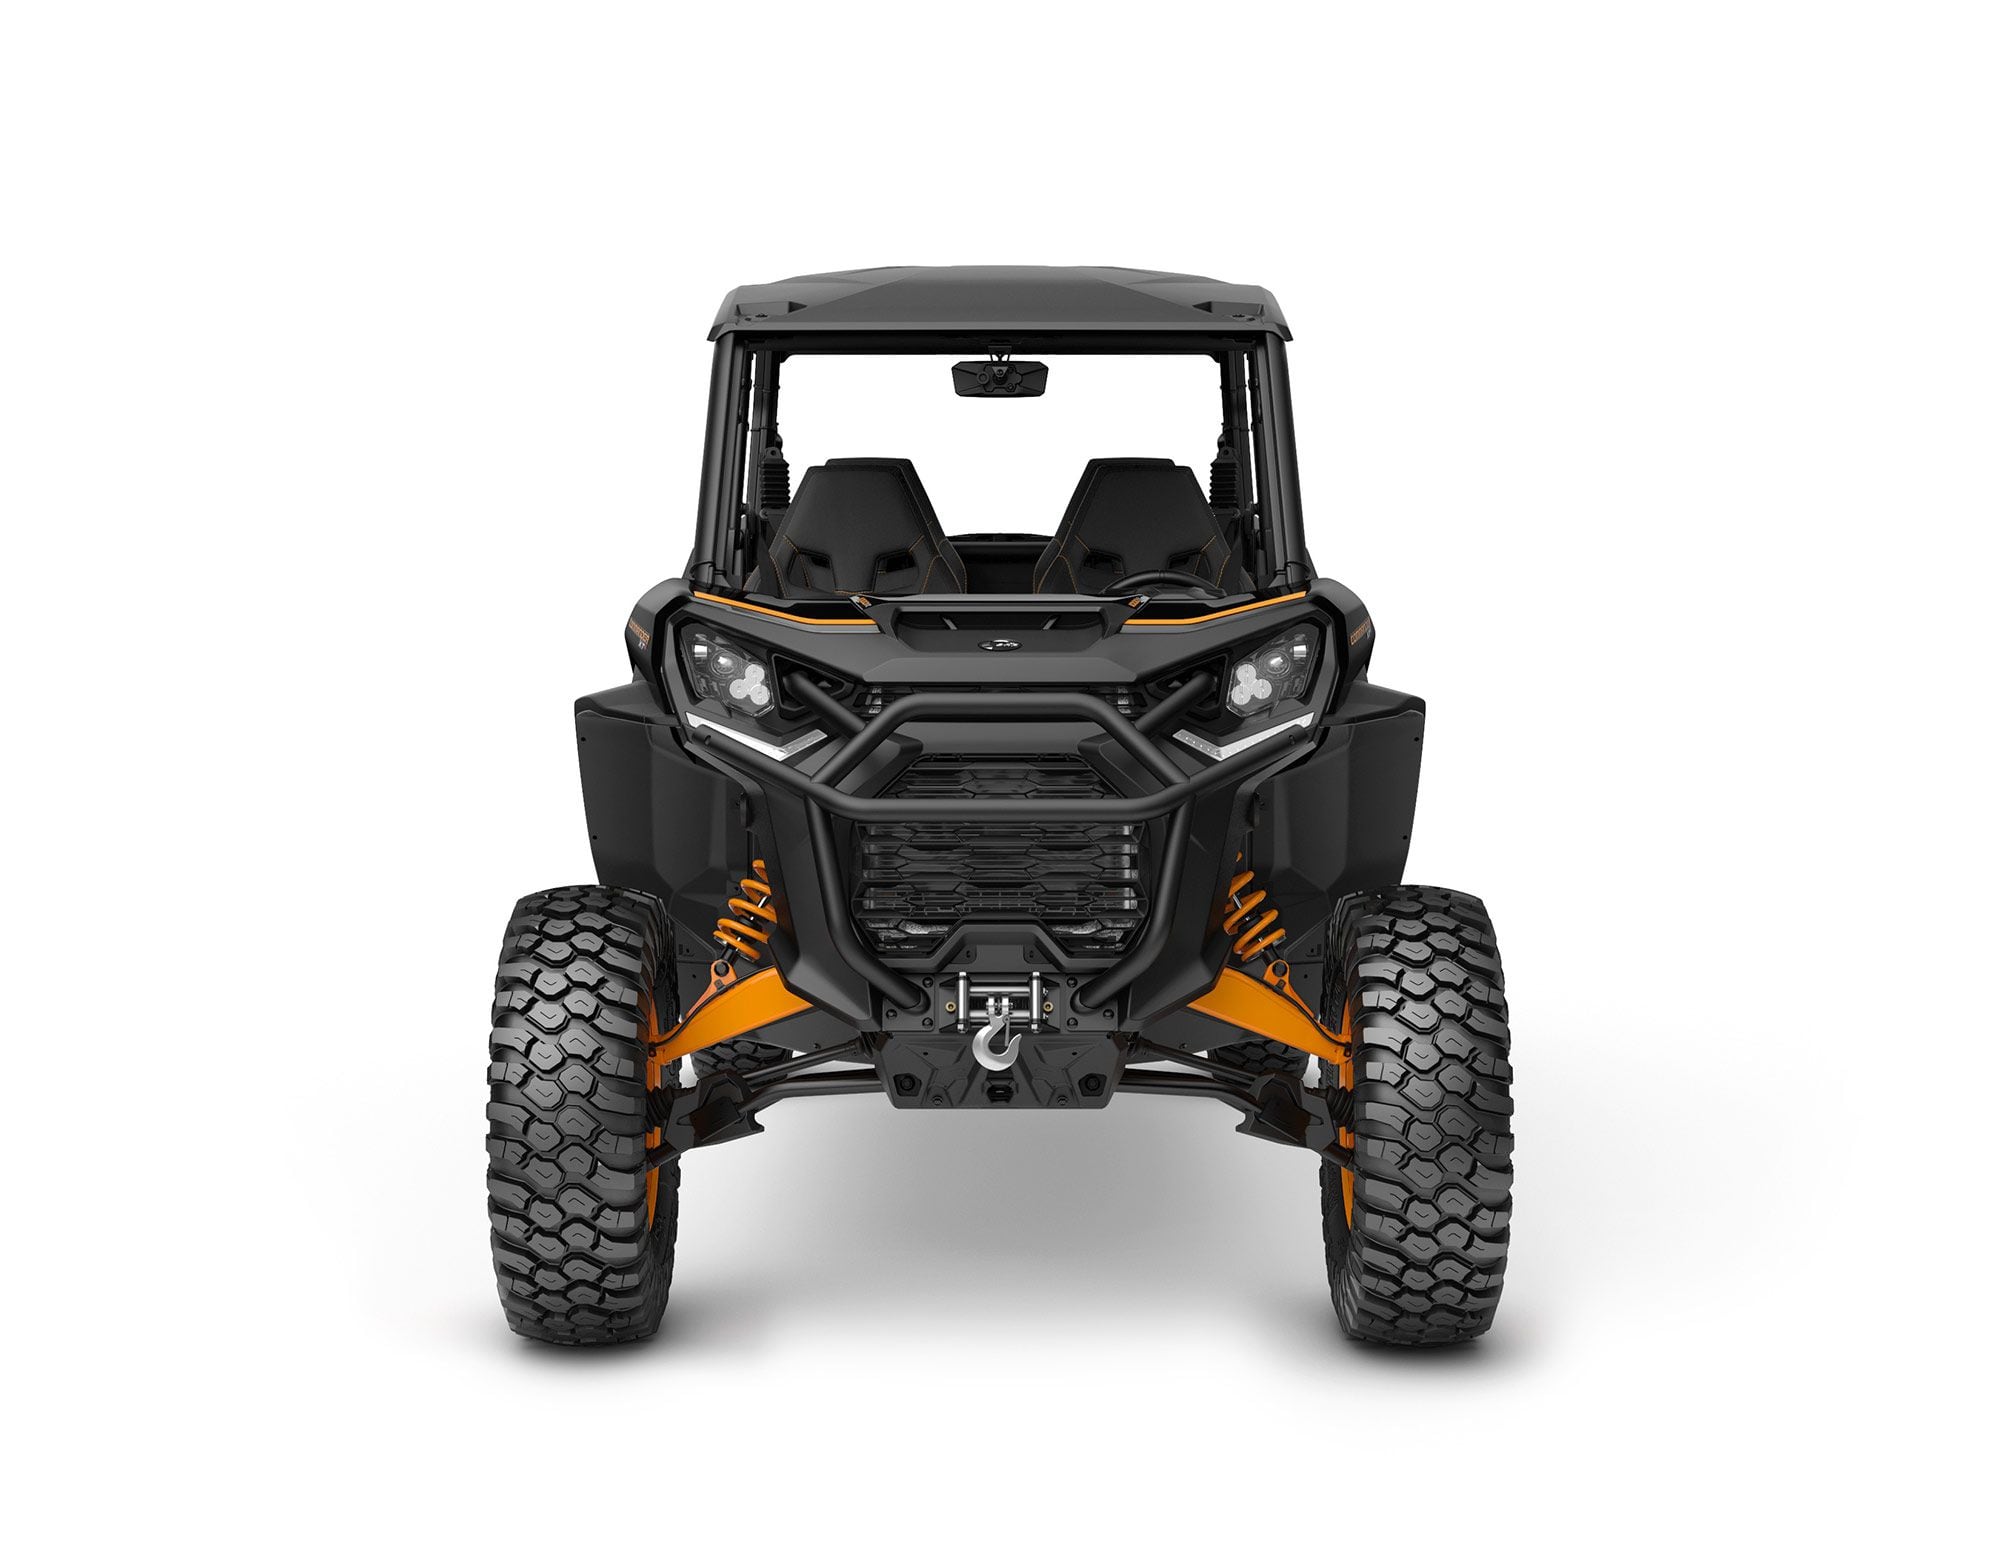 The XT-P also gets LED headlights and taillights, a rearview mirror, a roof, a 4,500-pound winch, and 30-inch XPS tires on 15-inch beadlock wheels.